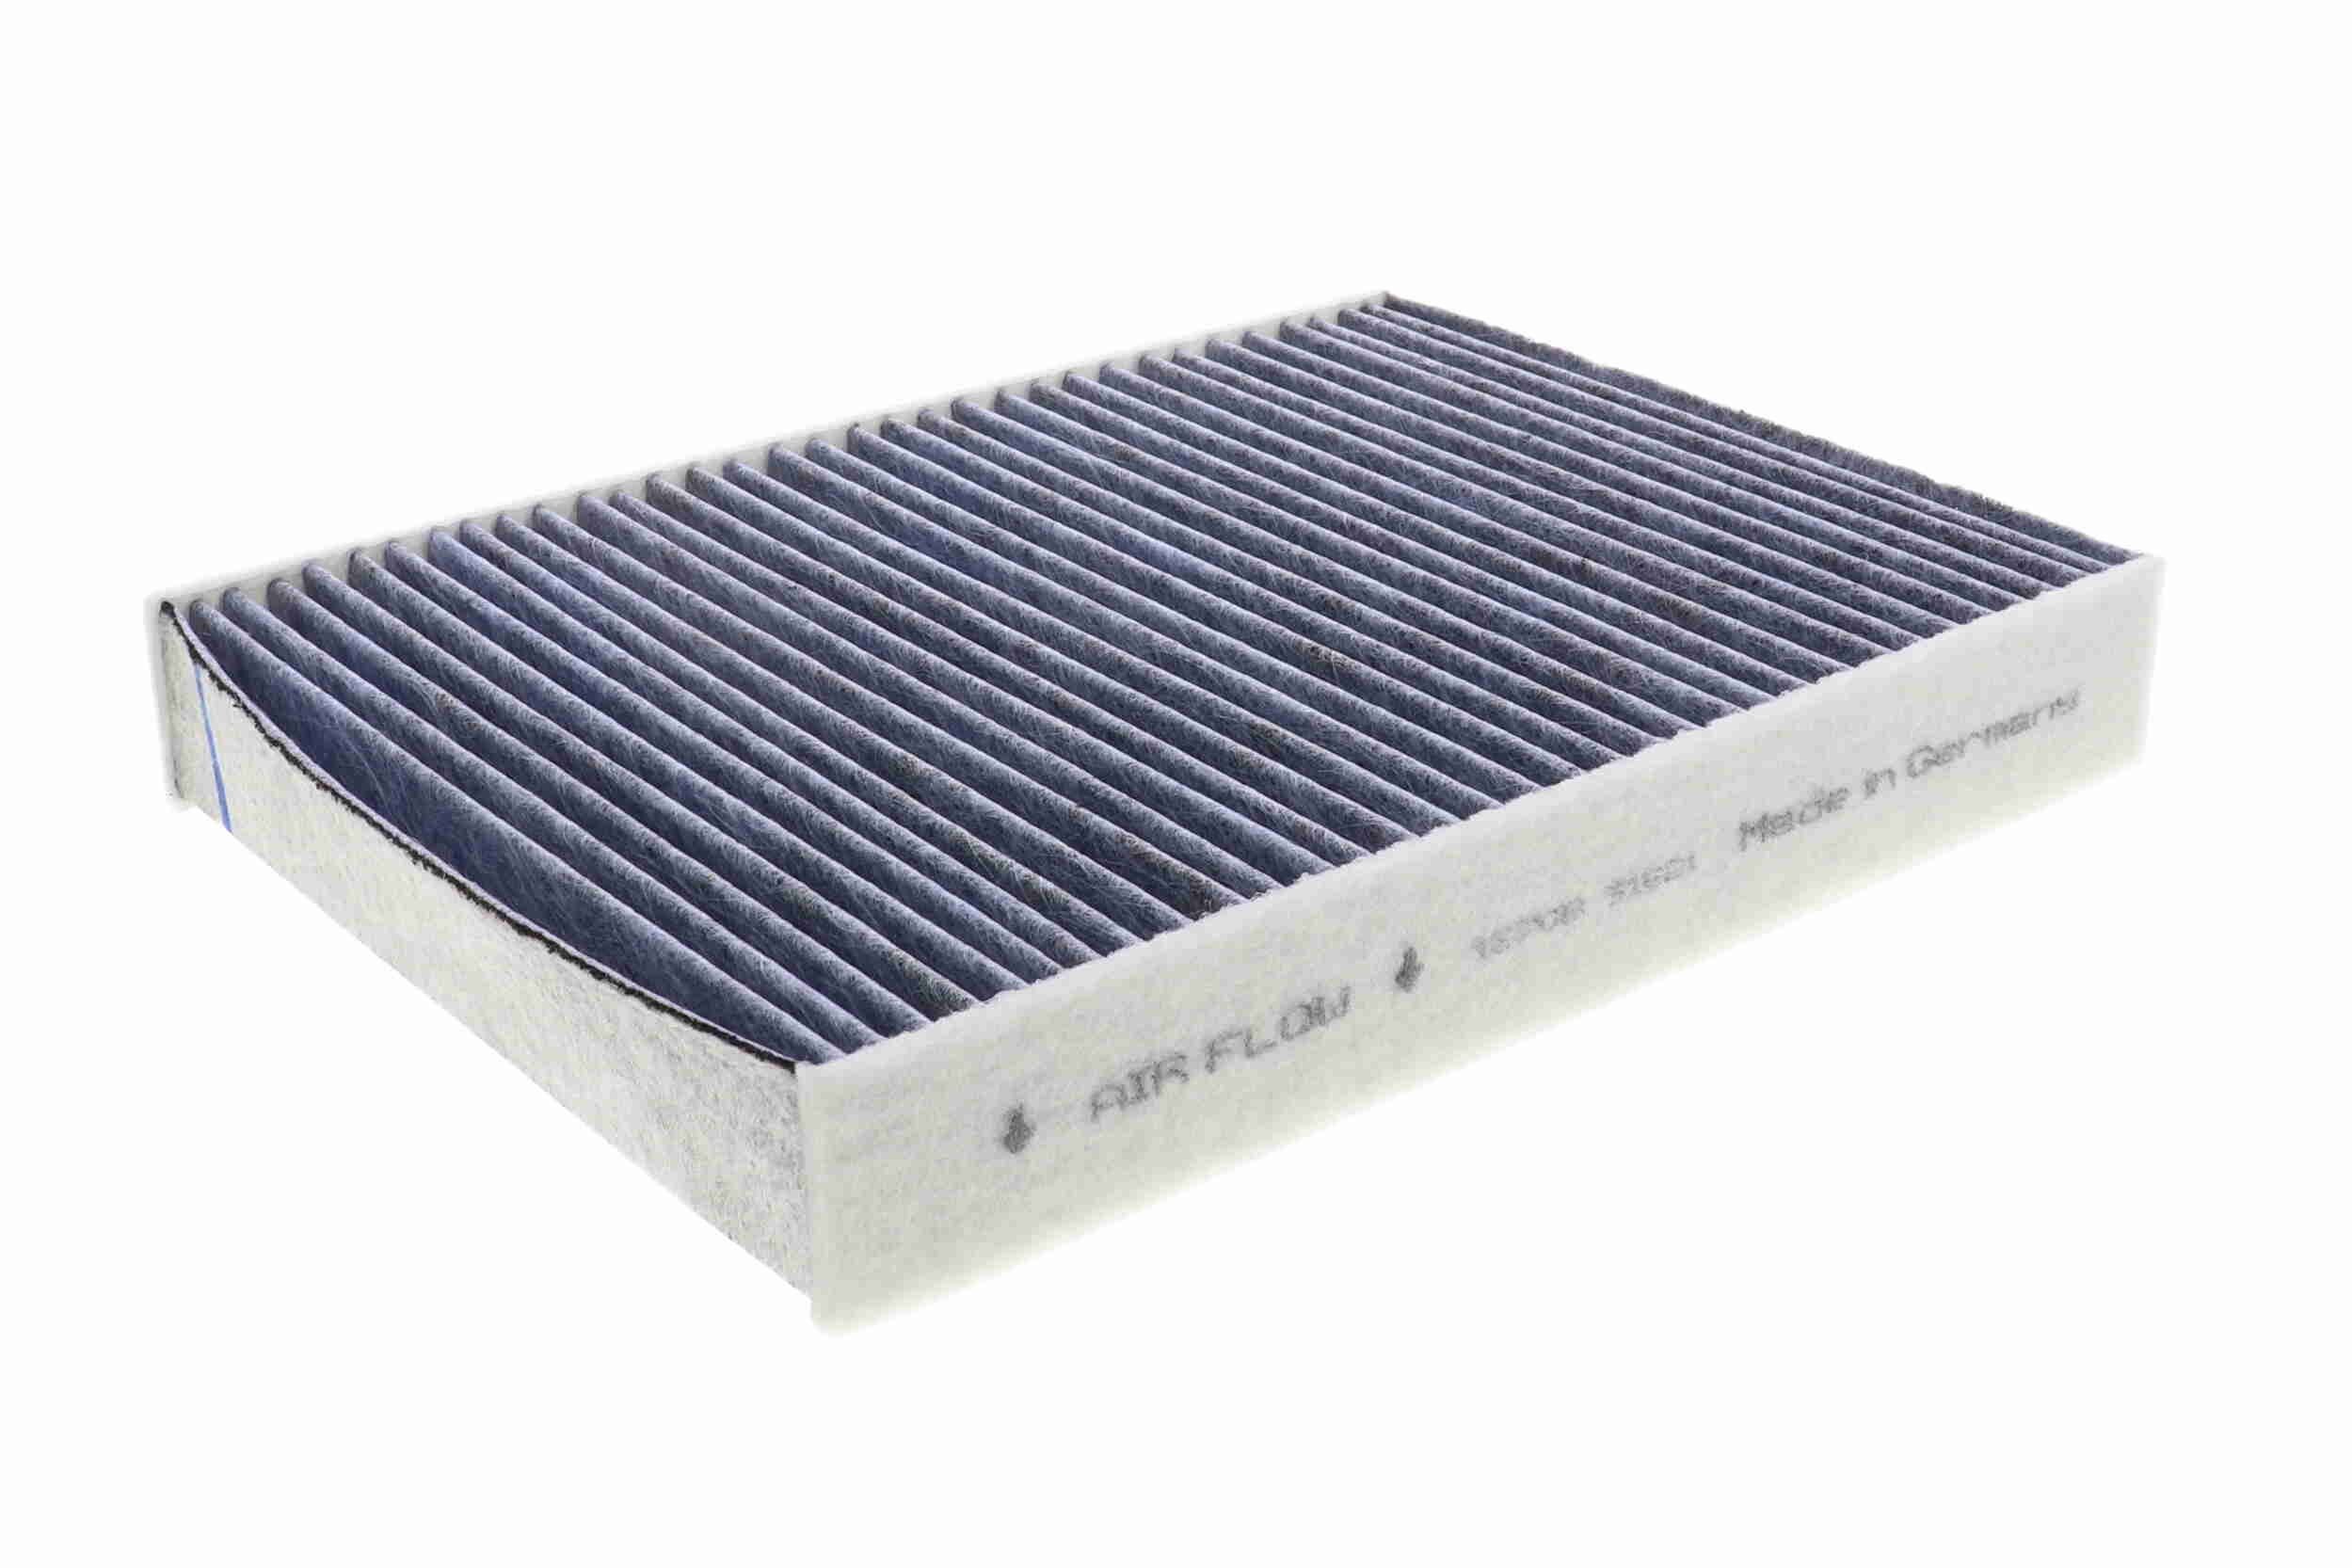 VEMO bio-functional cabin air filter, with antibacterial action, with fungicidal effect, Particulate filter (PM 2.5), with anti-allergic effect, with Odour Absorbent Effect, 250 mm x 179 mm x 35 mm, Activated Carbon Width: 179mm, Height: 35mm, Length: 250mm Cabin filter V46-32-0004 buy